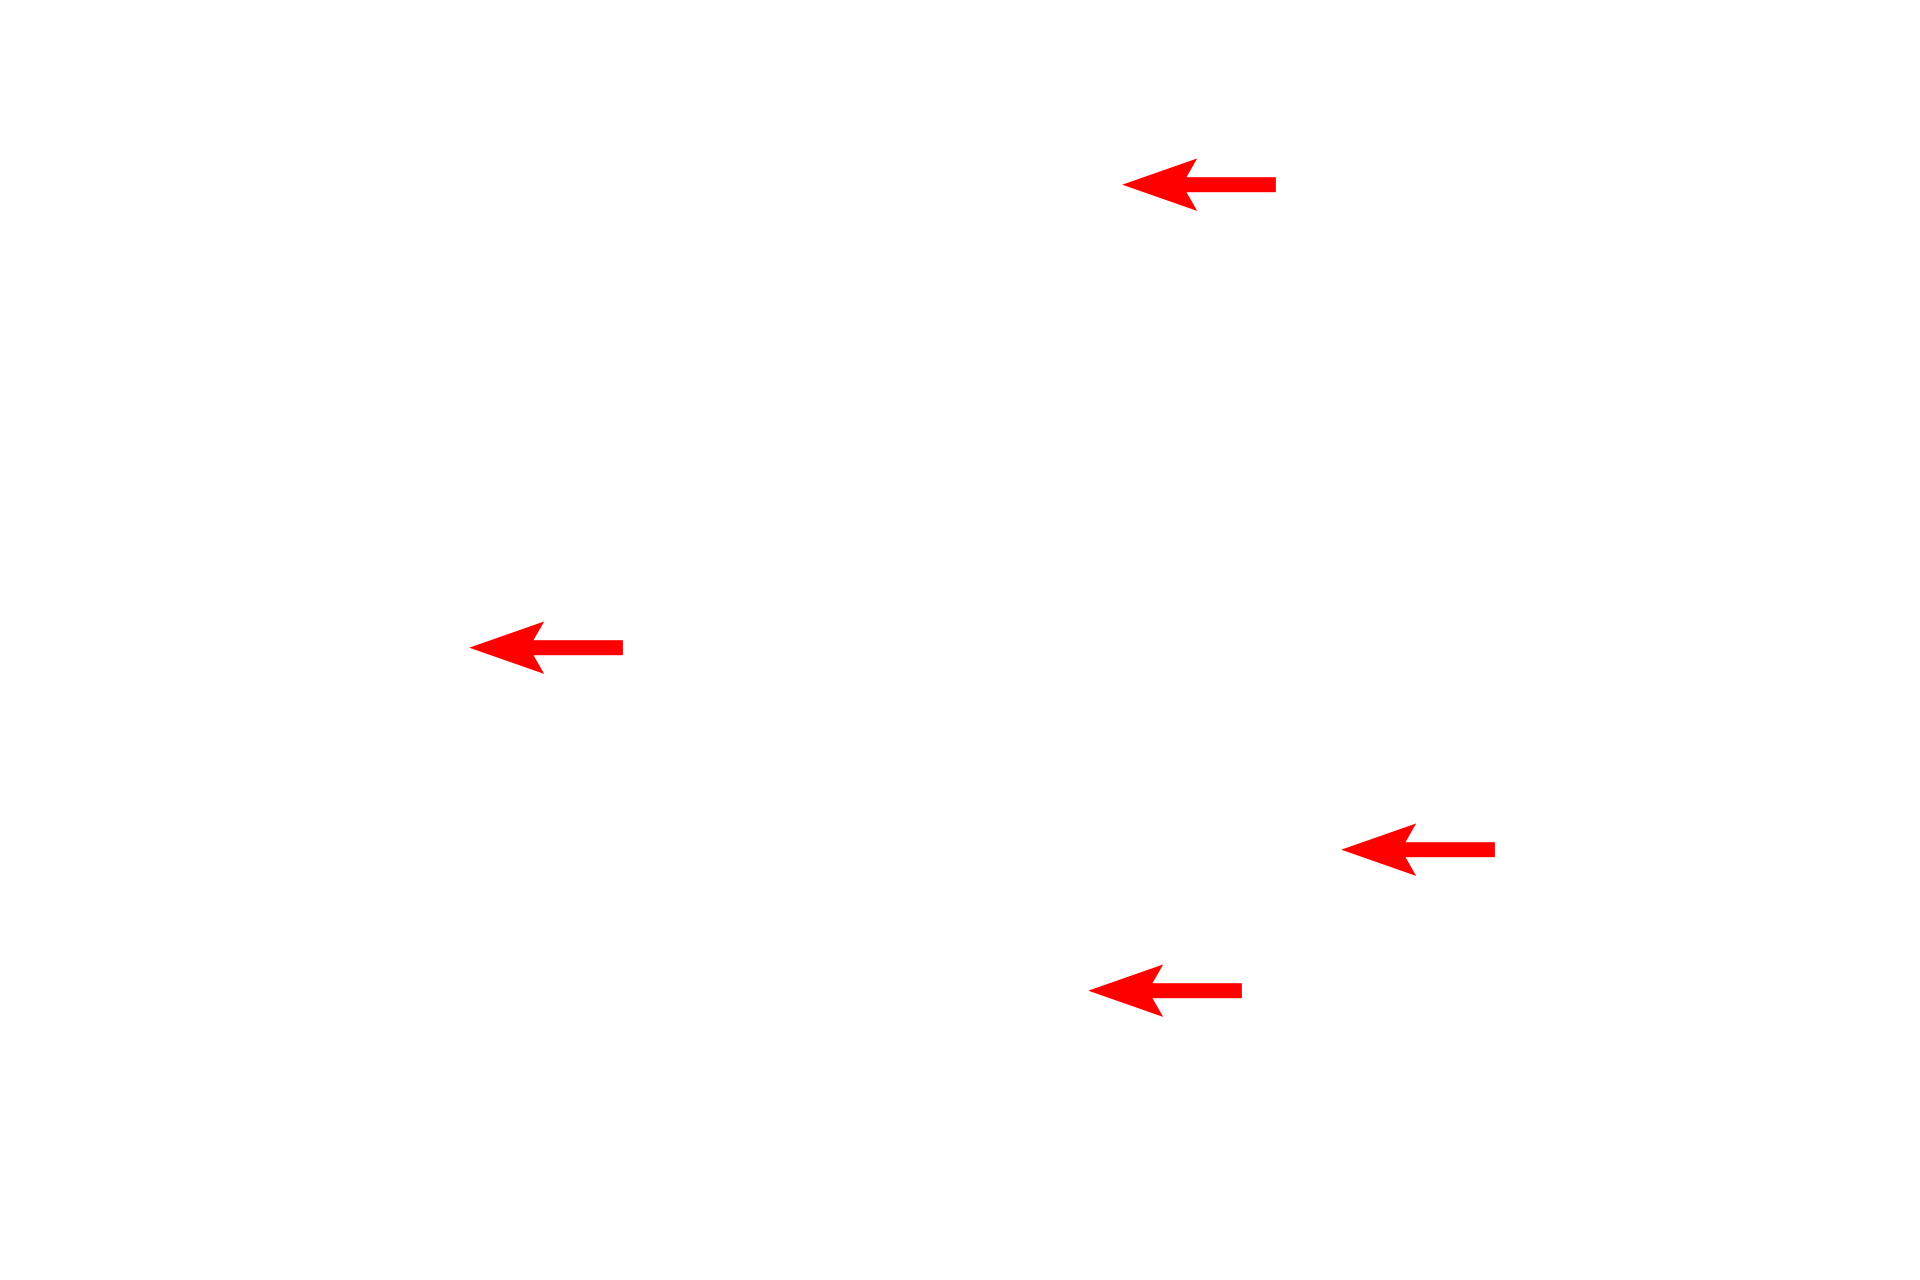 SER <p>SER consists of interconnected tubules and is the major site of lipid synthesis and calcium storage in the cell.  The majority of the SER in this field is cut in cross section and, thus, appears as circular profiles.  The amount of SER in a cell varies greatly depending on the function of the cell, e.g., SER is abundant in steroid secreting cells and liver cells (hepatocytes) for detoxification.  25,000x</p>
